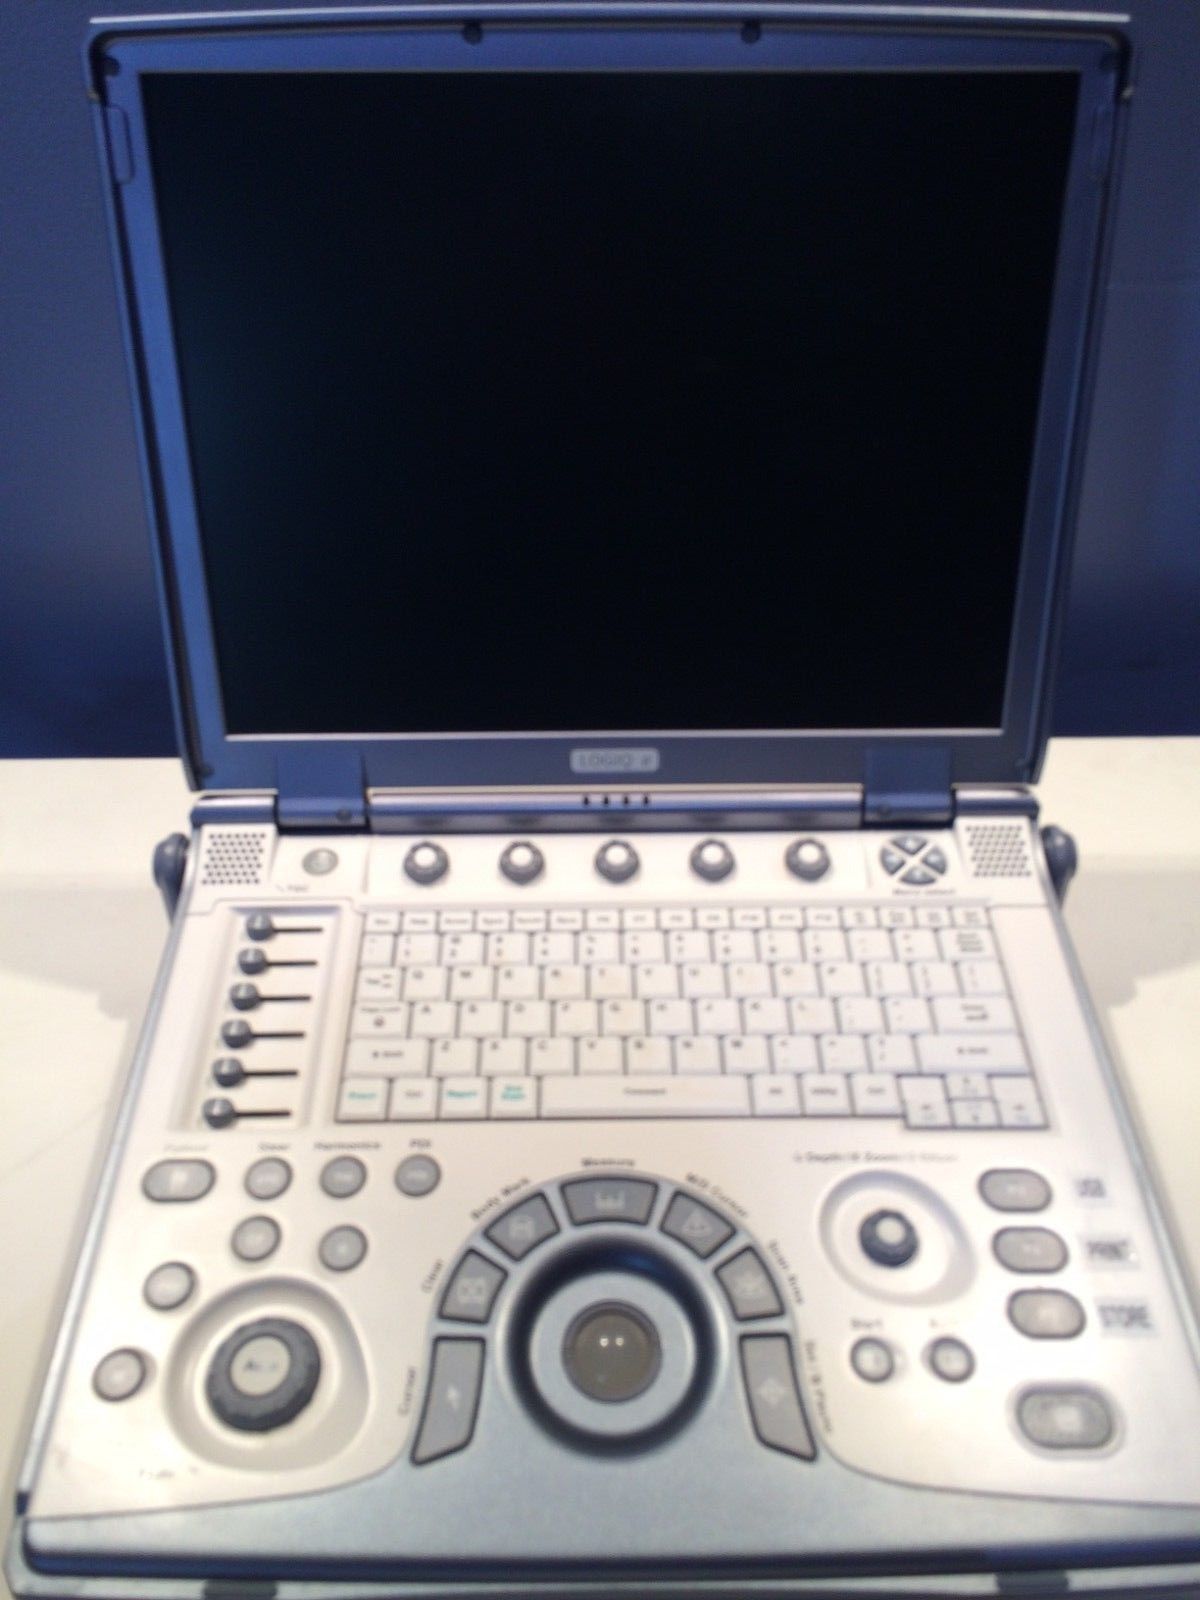 a ultrasound computer sitting on top of a table